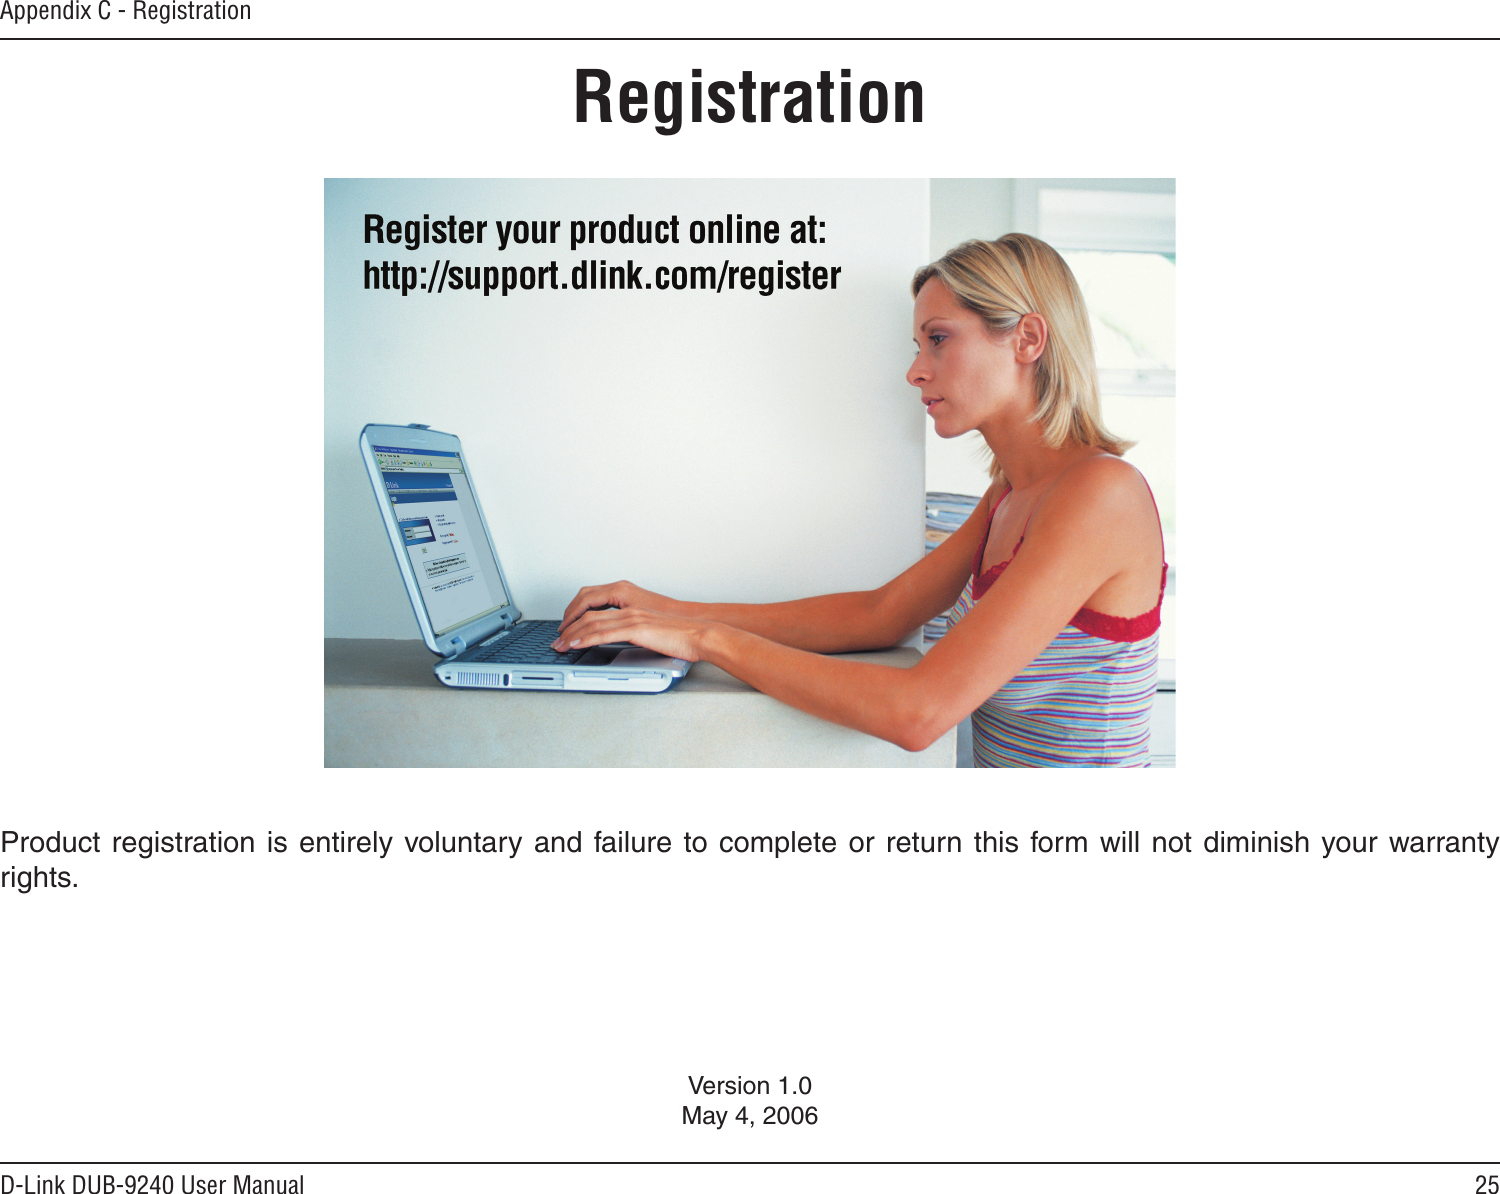 25D-Link DUB-9240 User ManualAppendix C - RegistrationVersion 1.0May 4, 2006Product registration is entirely voluntary and failure to complete  or return this form will not diminish your warranty rights.Registration